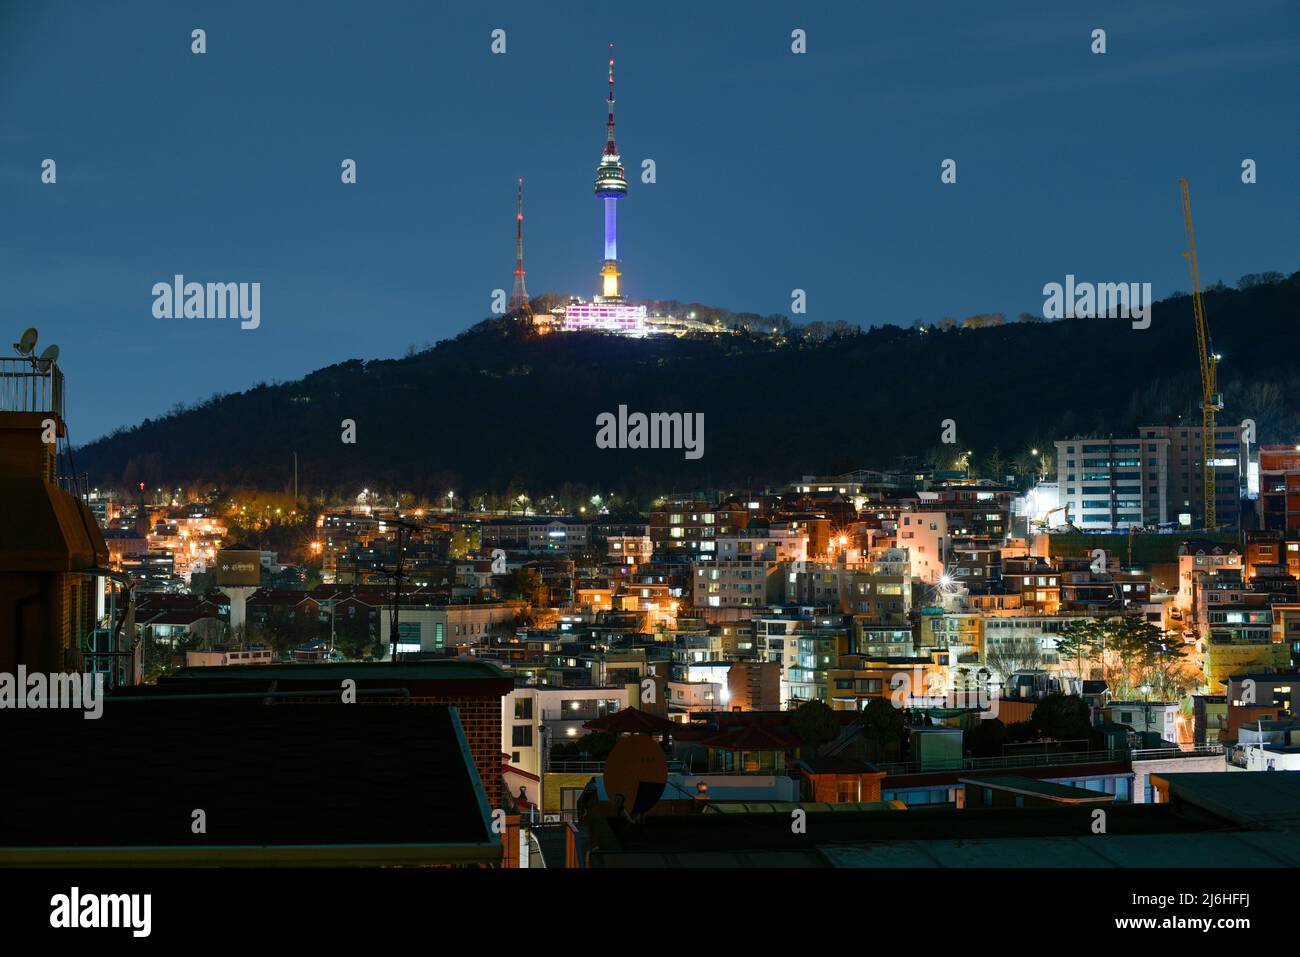 Itaewon district and Namsan Tower in Yongsan, Seoul, South Korea at night on February 28, 2022 Stock Photo